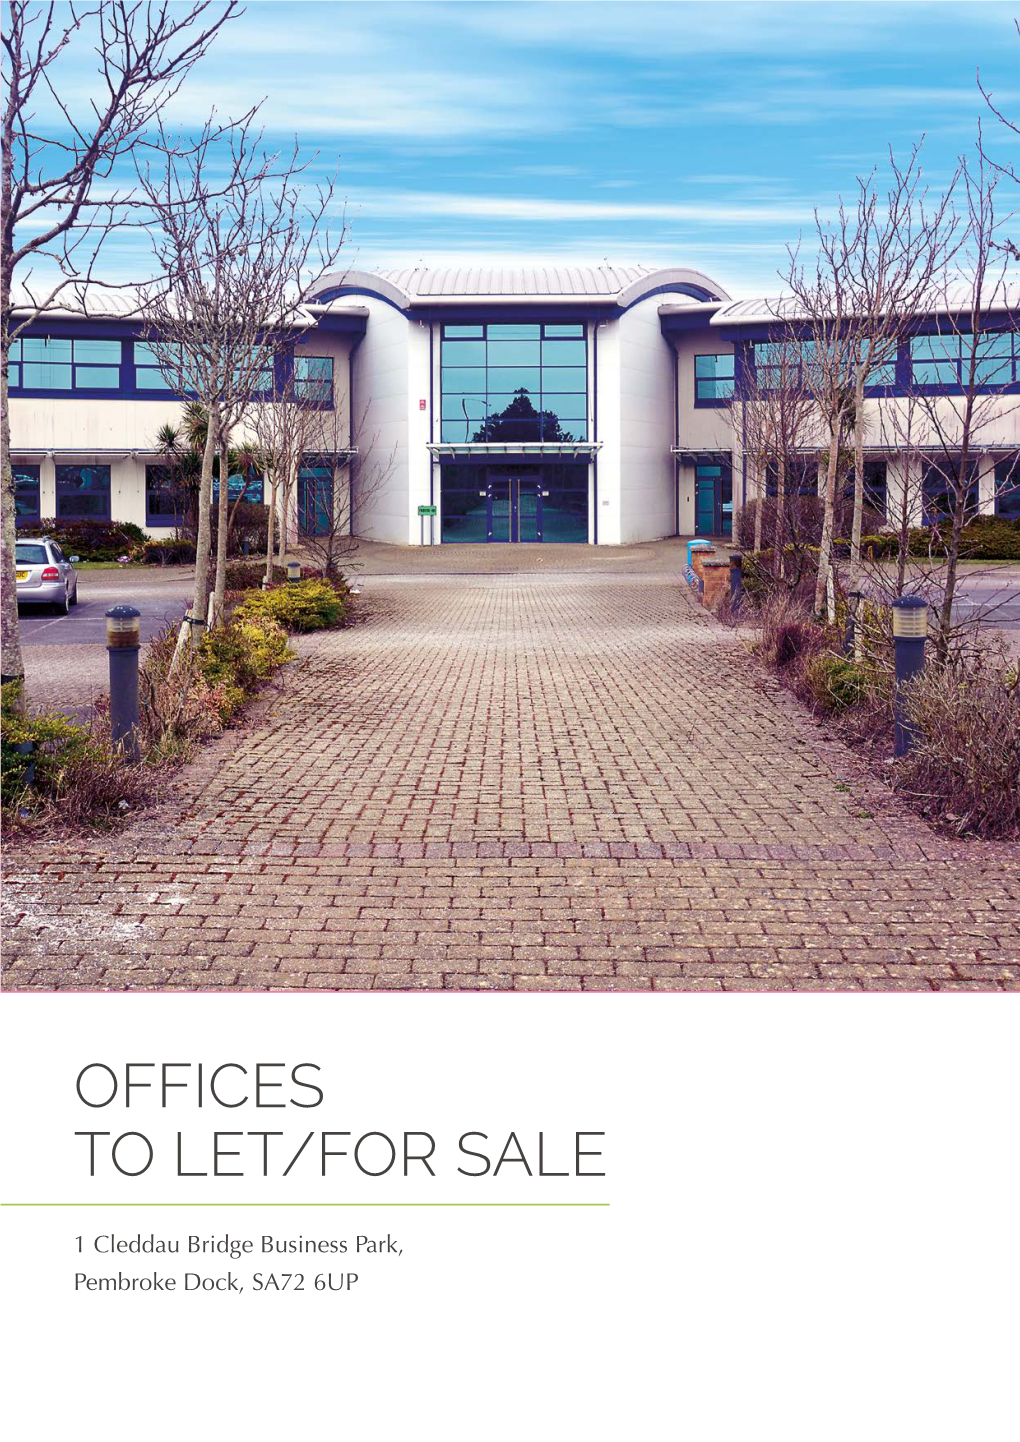 Offices to Let/For Sale